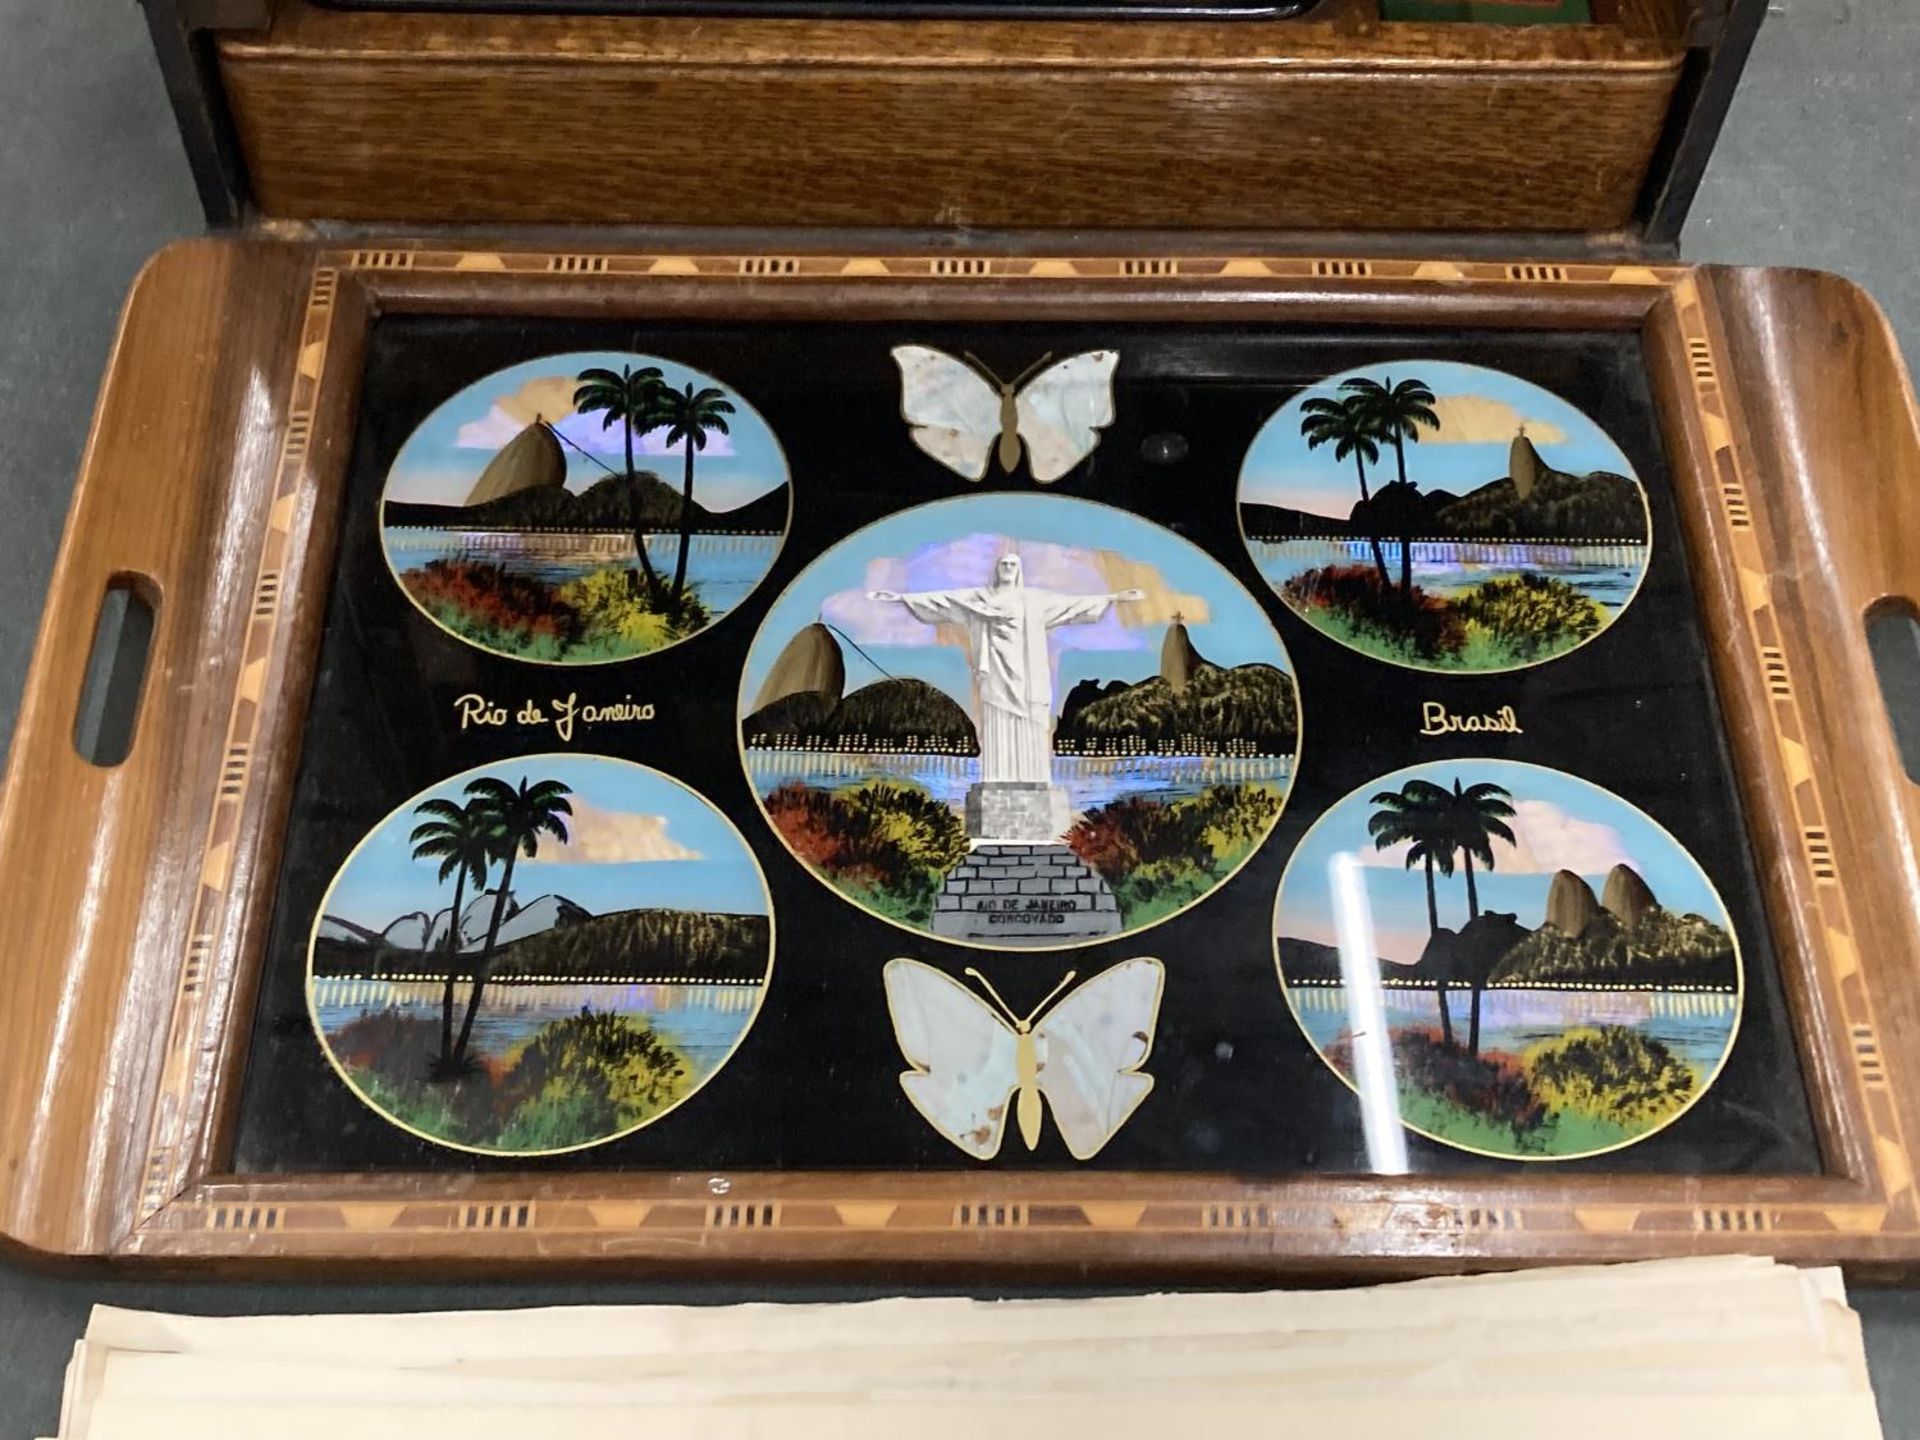 A VINTAGE TRAY FROM BRAZIL WITH BUTTERFLY WINGS DECORATION